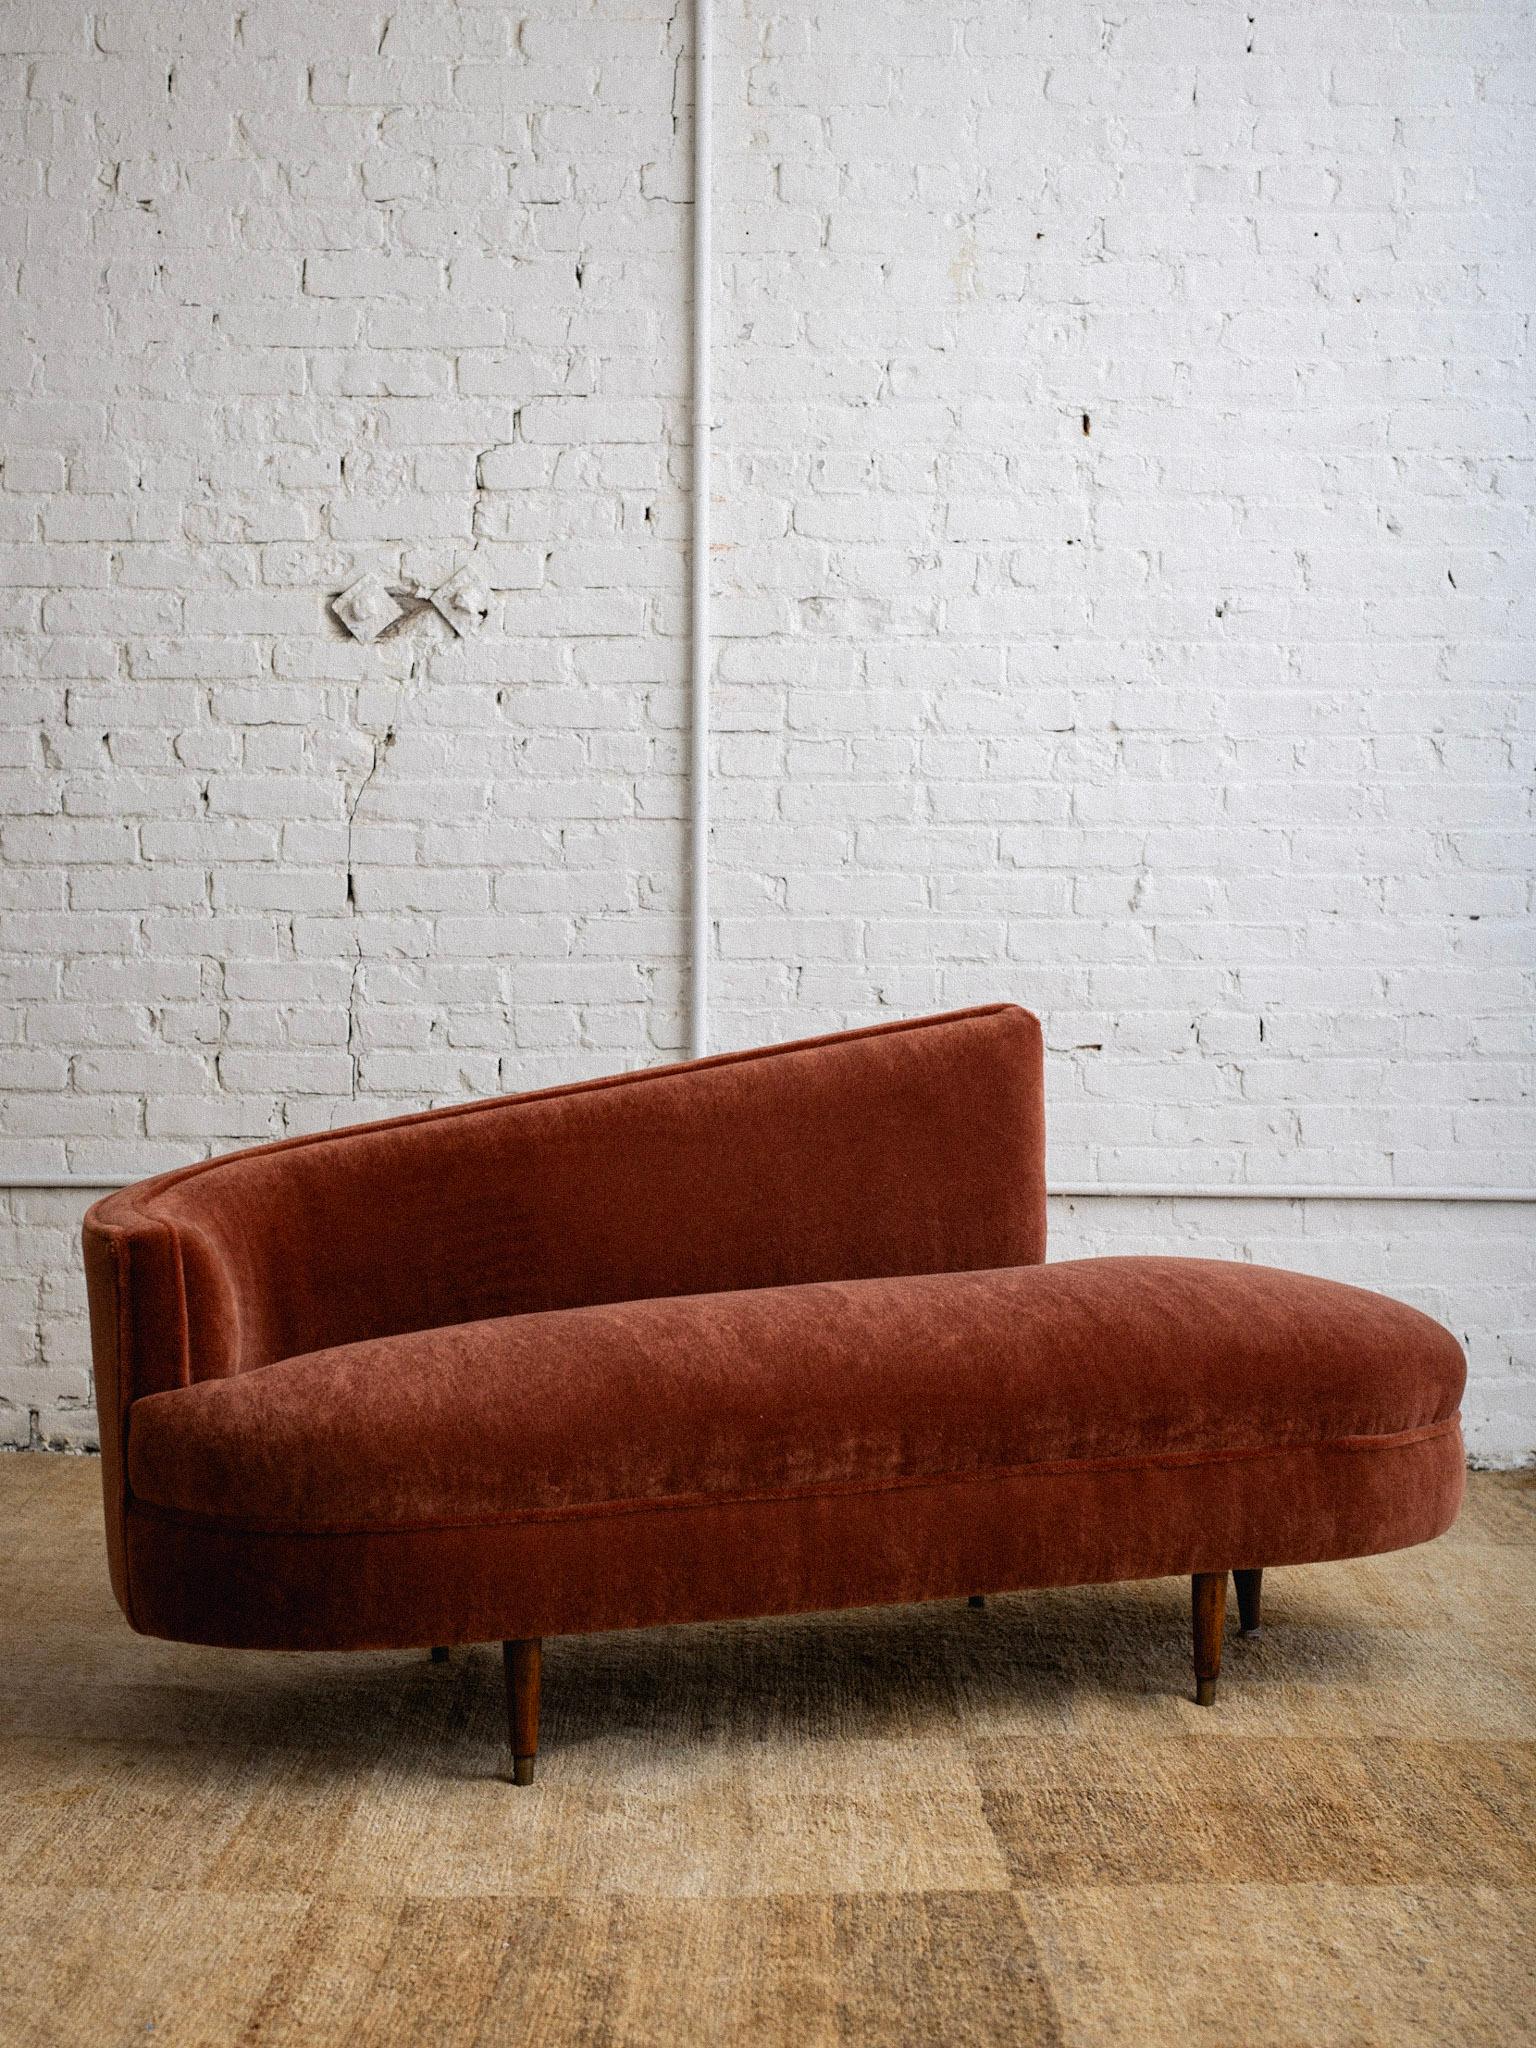 A petite Italian chaise lounge. Newly reupholstered in a high pile rust mohair. Ideal Size to be used at the foot of a bed or as a hall bench. Sourced in Northern Italy.